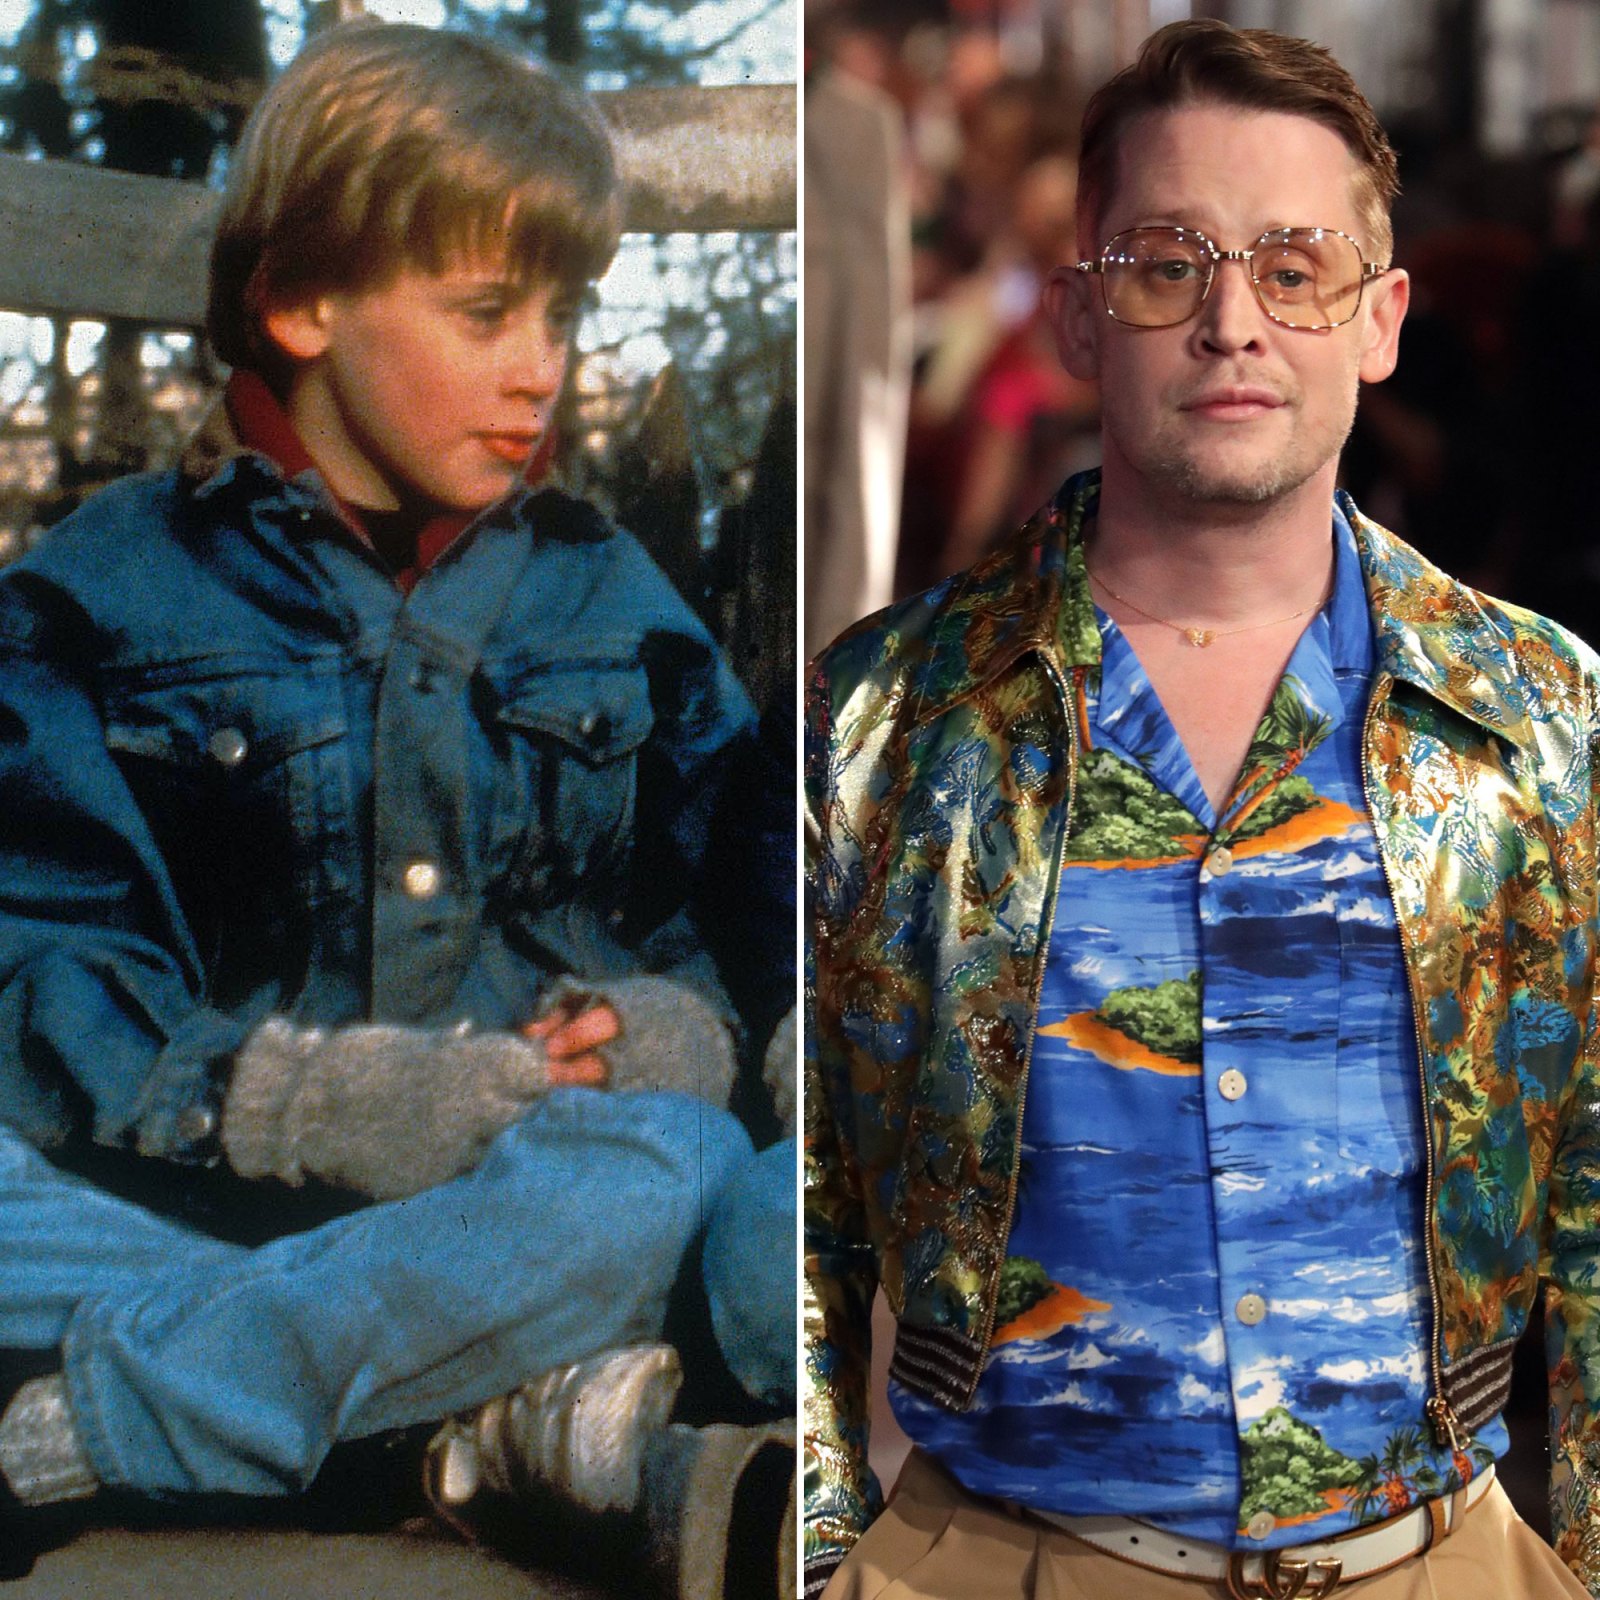 Macaulay Culkin Creepy Horror Movie Kids Where Are They Now? Drew Barrymore Haley Joel Osment and More